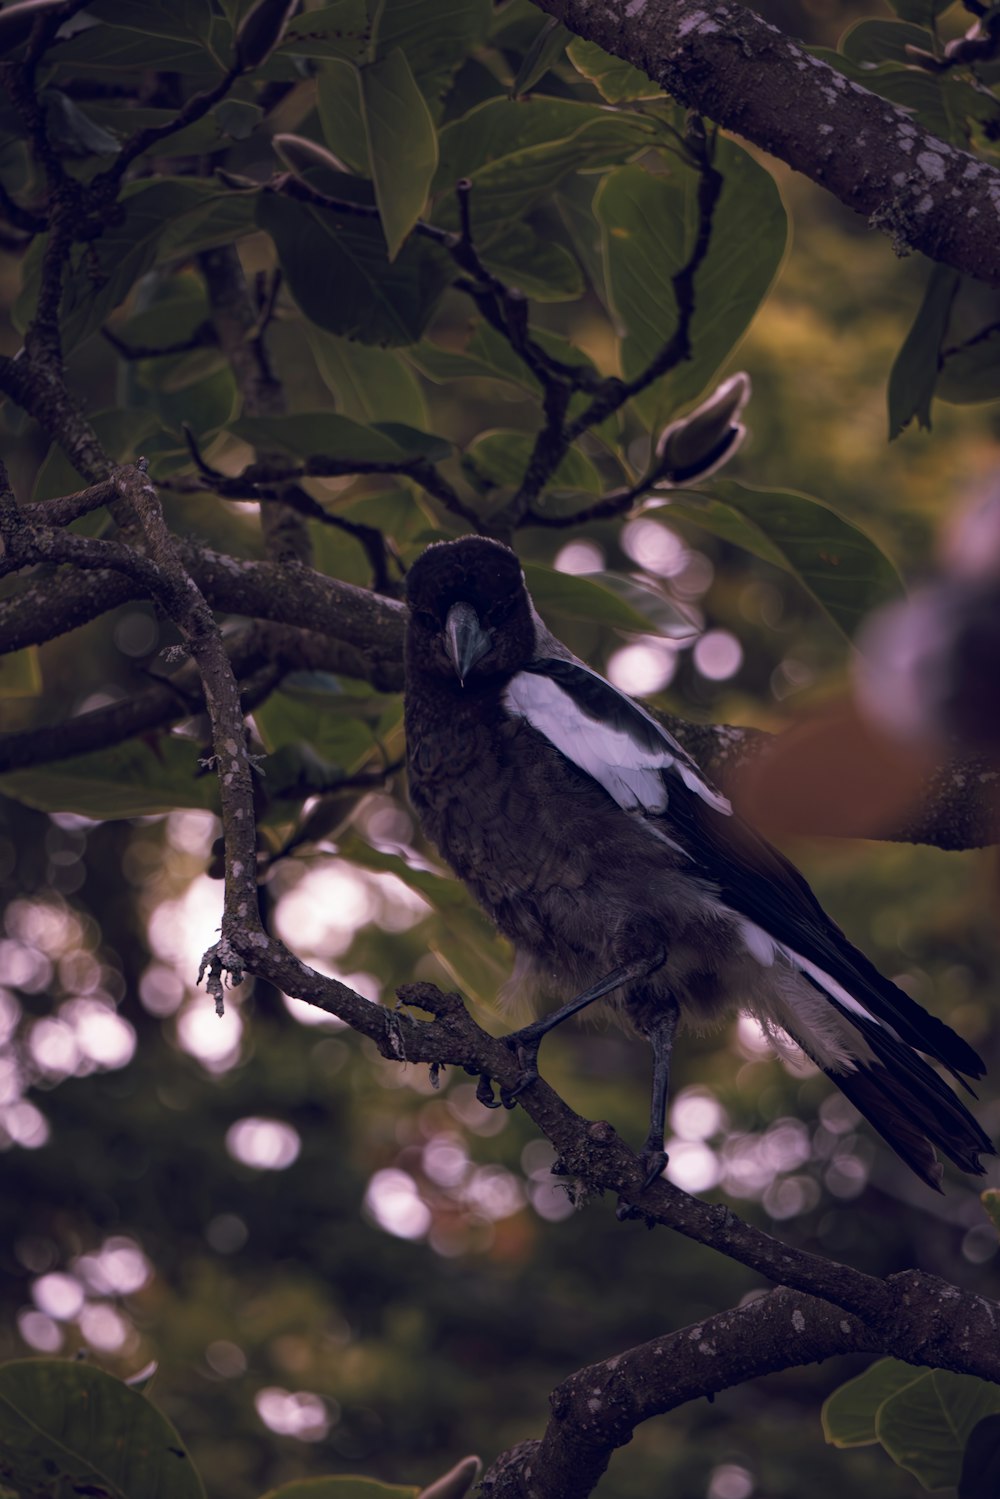 a black and white bird sitting on a tree branch